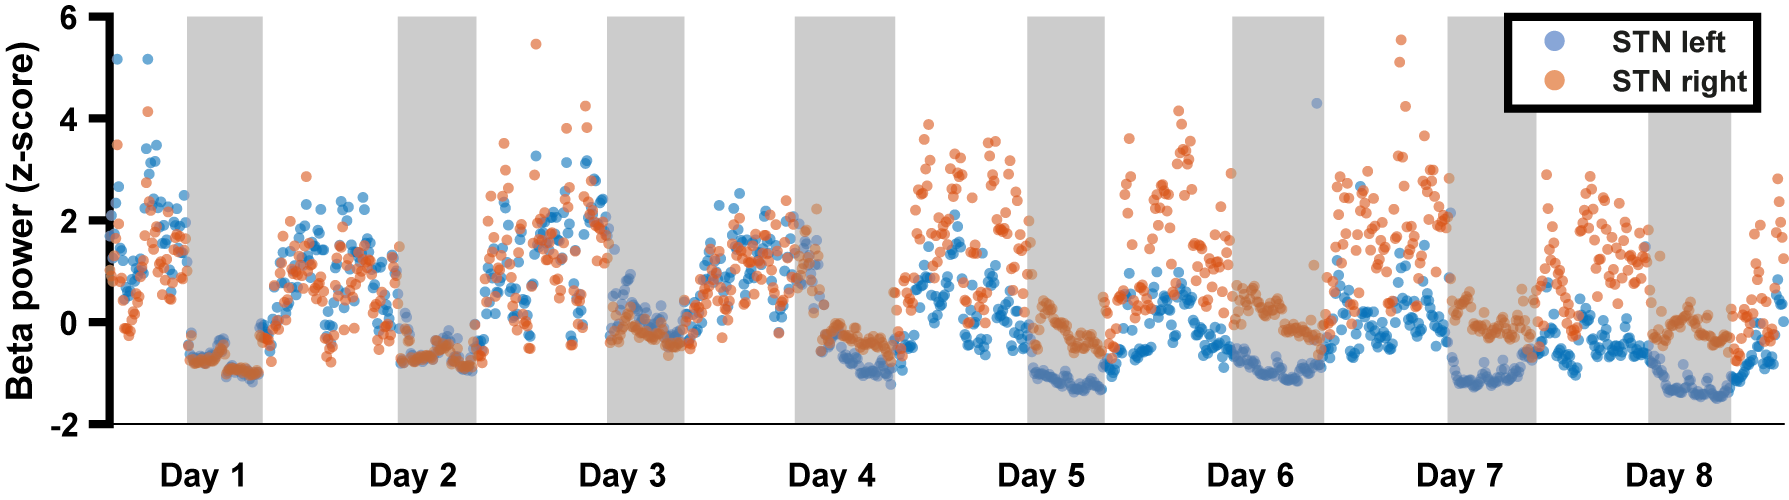 A graph of data indicating how beta activity in the brain (vertical axis) varies across the day and night (horizontal axis); coloured dots show the power of beta activity every 10 minutes.